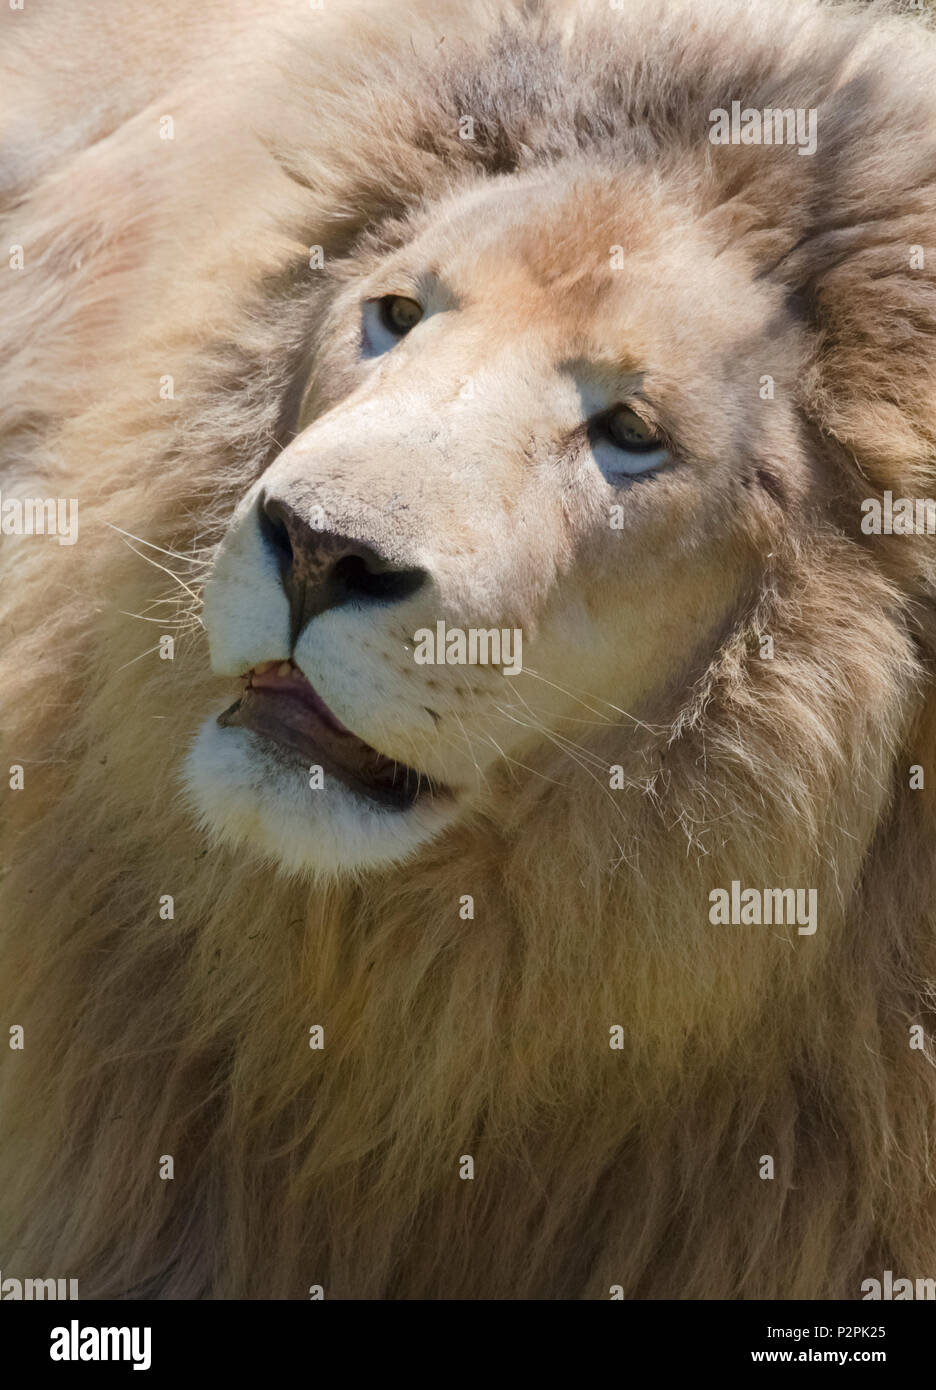 Lion, Western Cape Province, South Africa Stock Photo